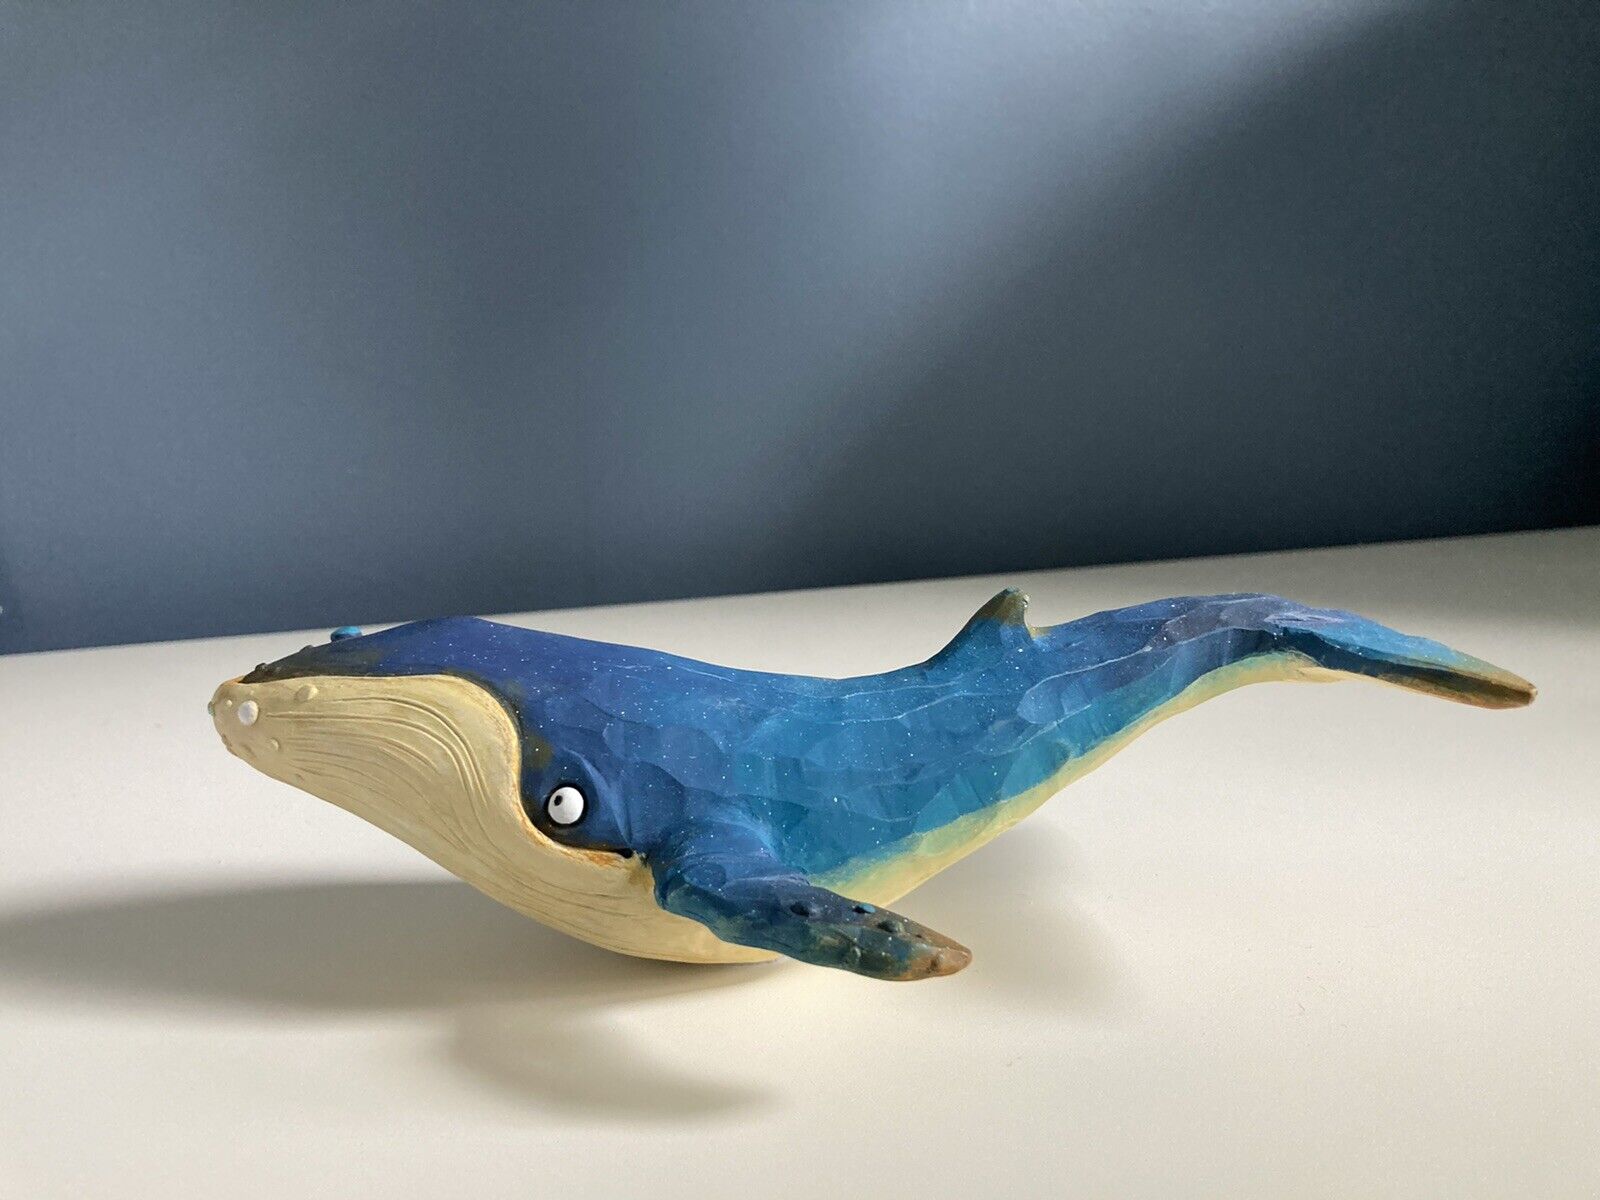 Sculpted Whale Figurine by Tiny Sparks, Spain